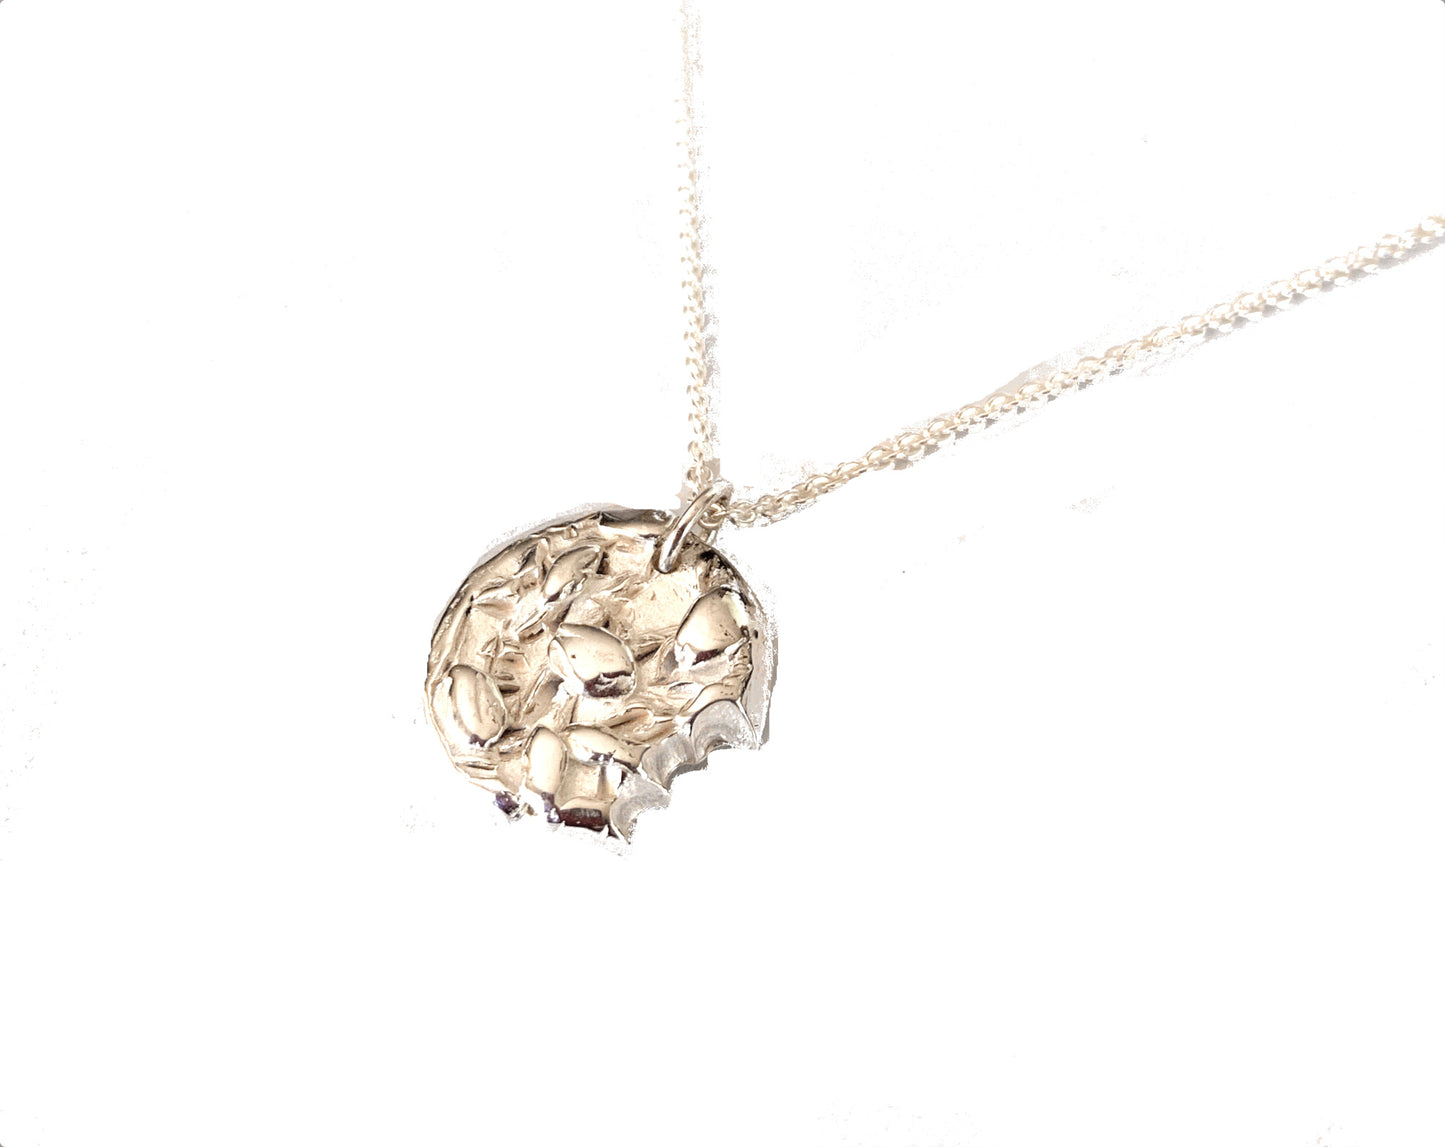 Oatmeal Cookie Pendant Necklace in Sterling Silver